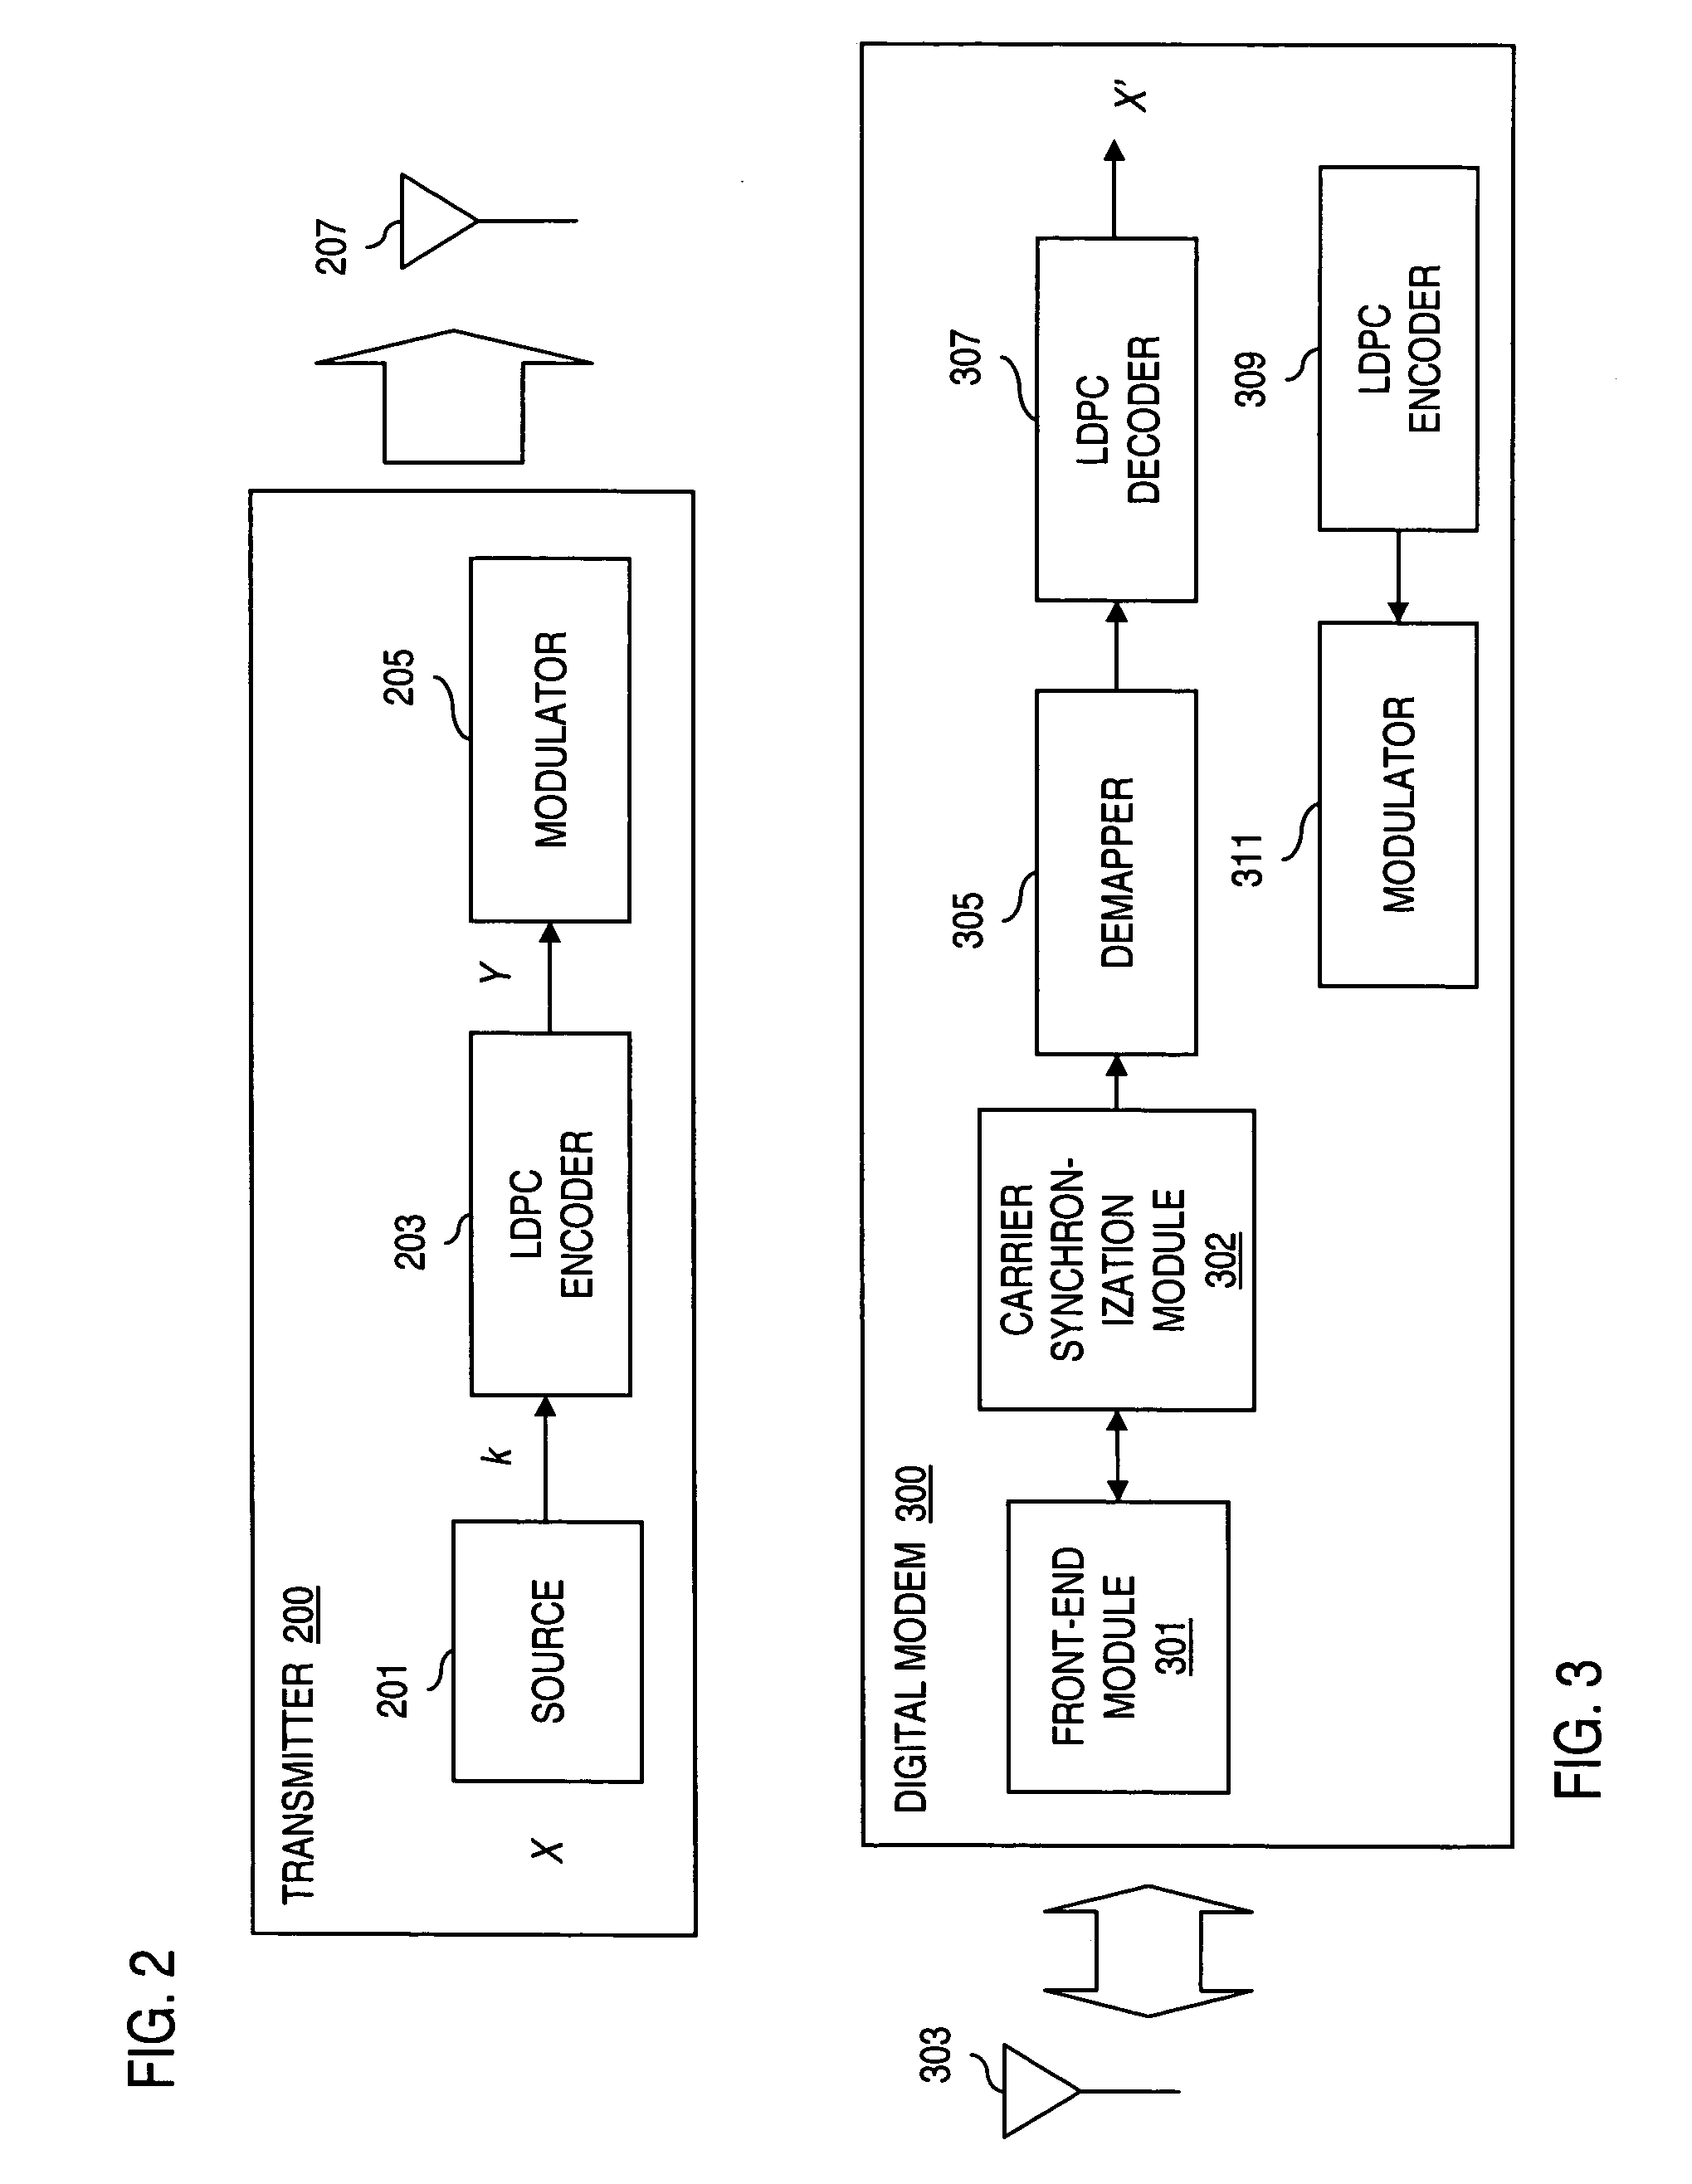 Method and apparatus for providing carrier synchronization in digital broadcast and interactive systems